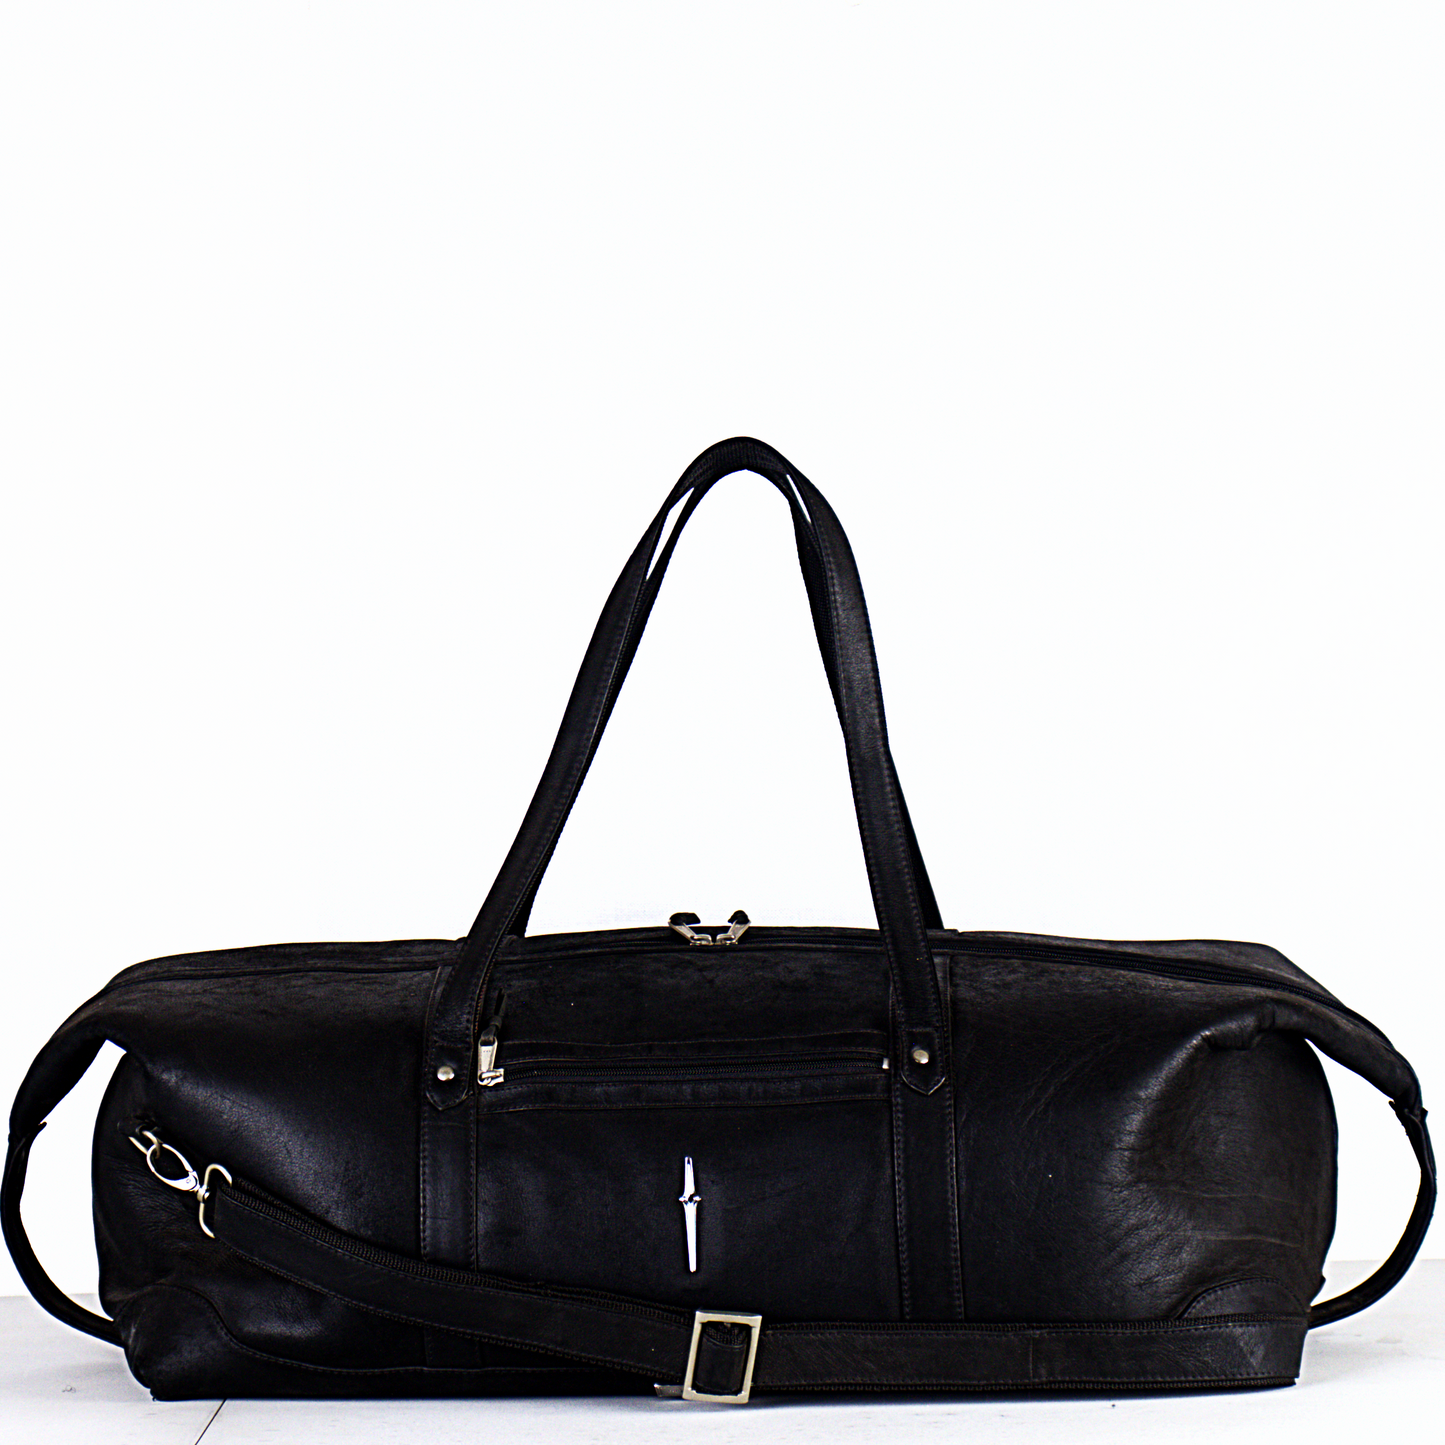 Vic Leather Travel bag